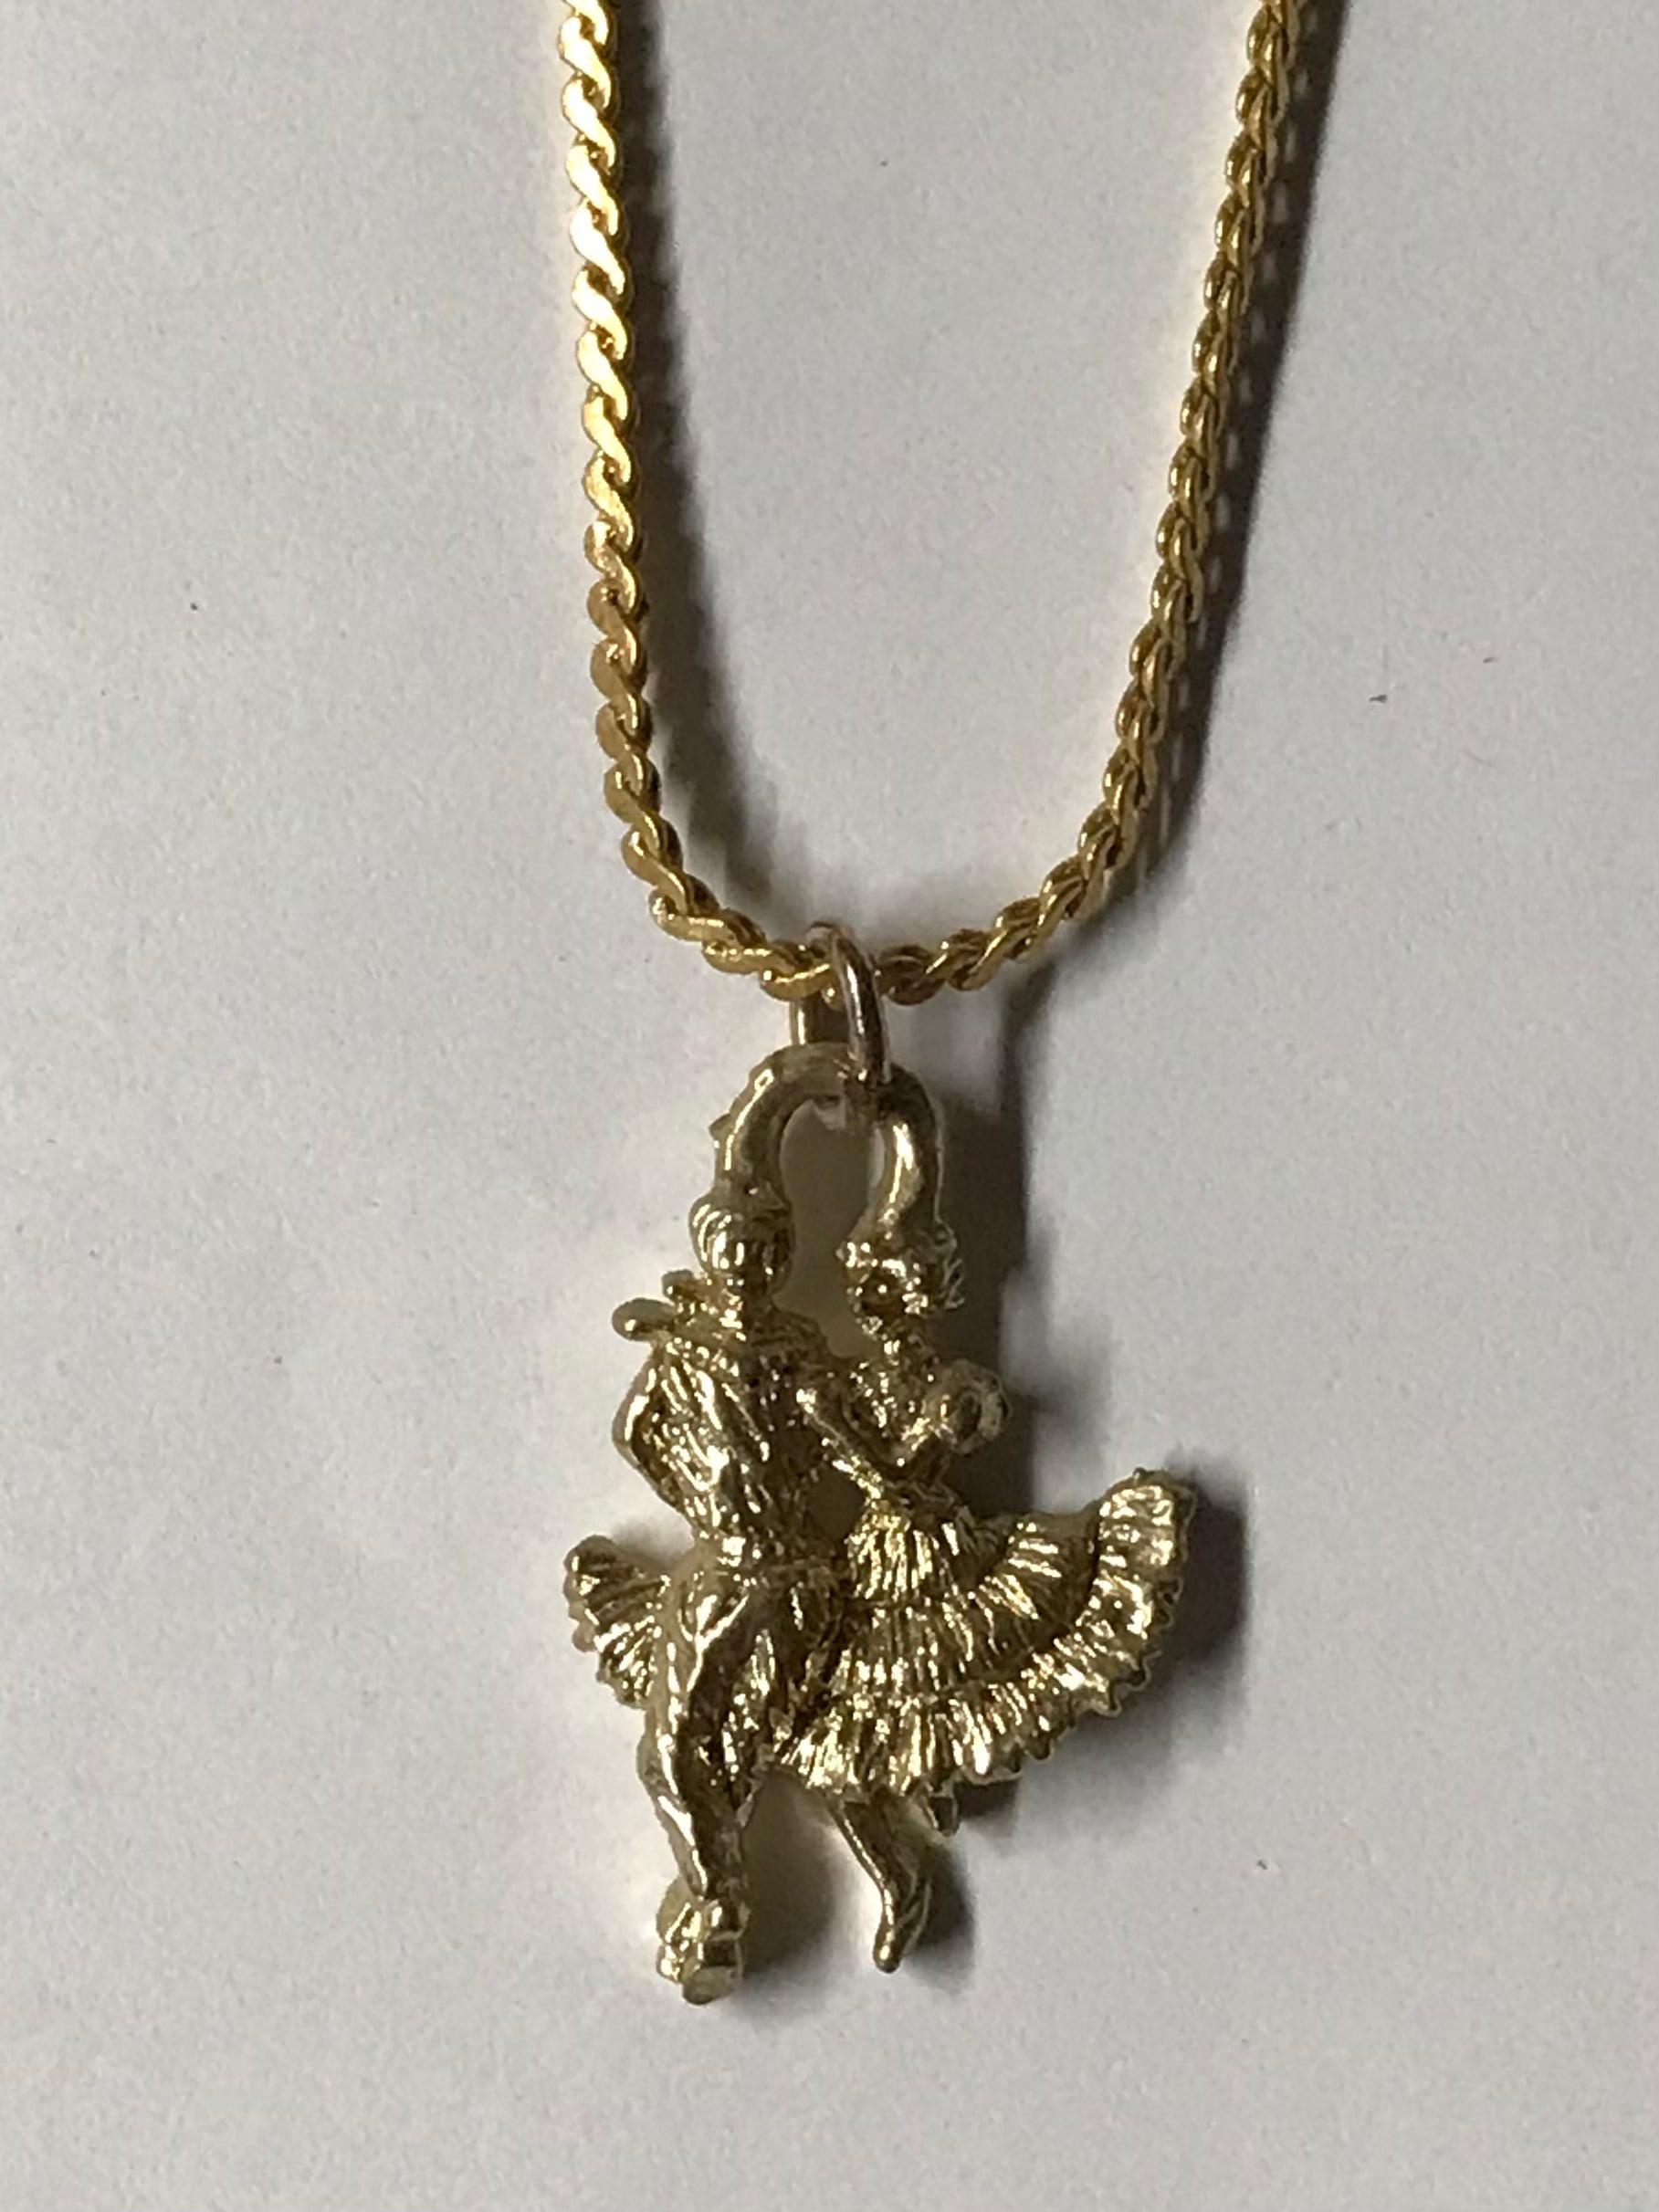 A thin Gold Dancers Necklace with a bird on it from Square Up Fashions.